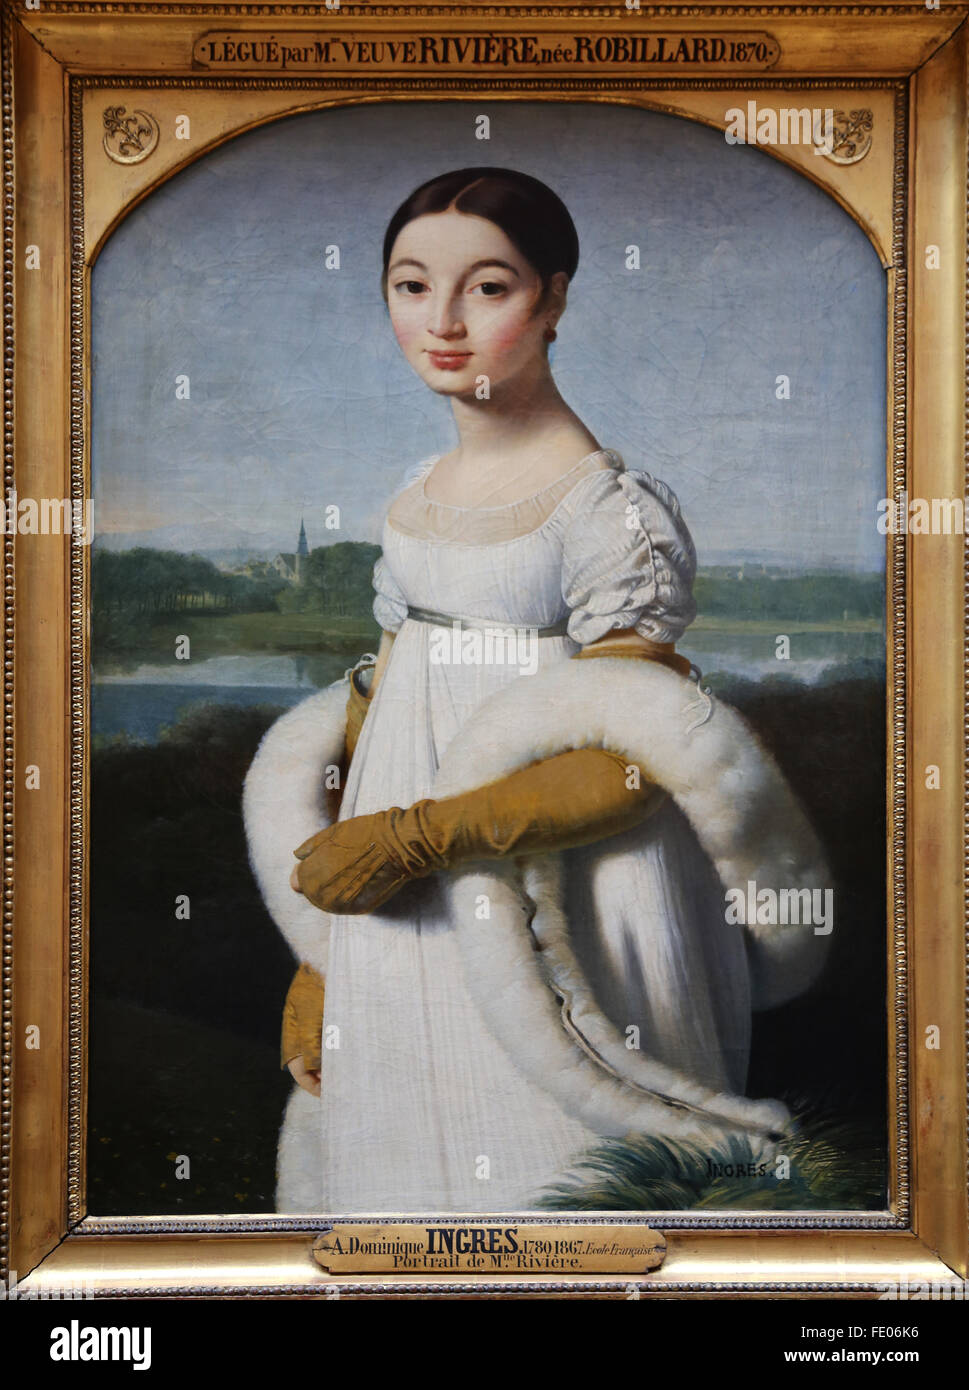 Mademoiselle Caroline Riviere, 1806, by French Neoclassical painter Jean-Auguste-Dominique Ingres (1780-1867). Louvre Museum. Stock Photo